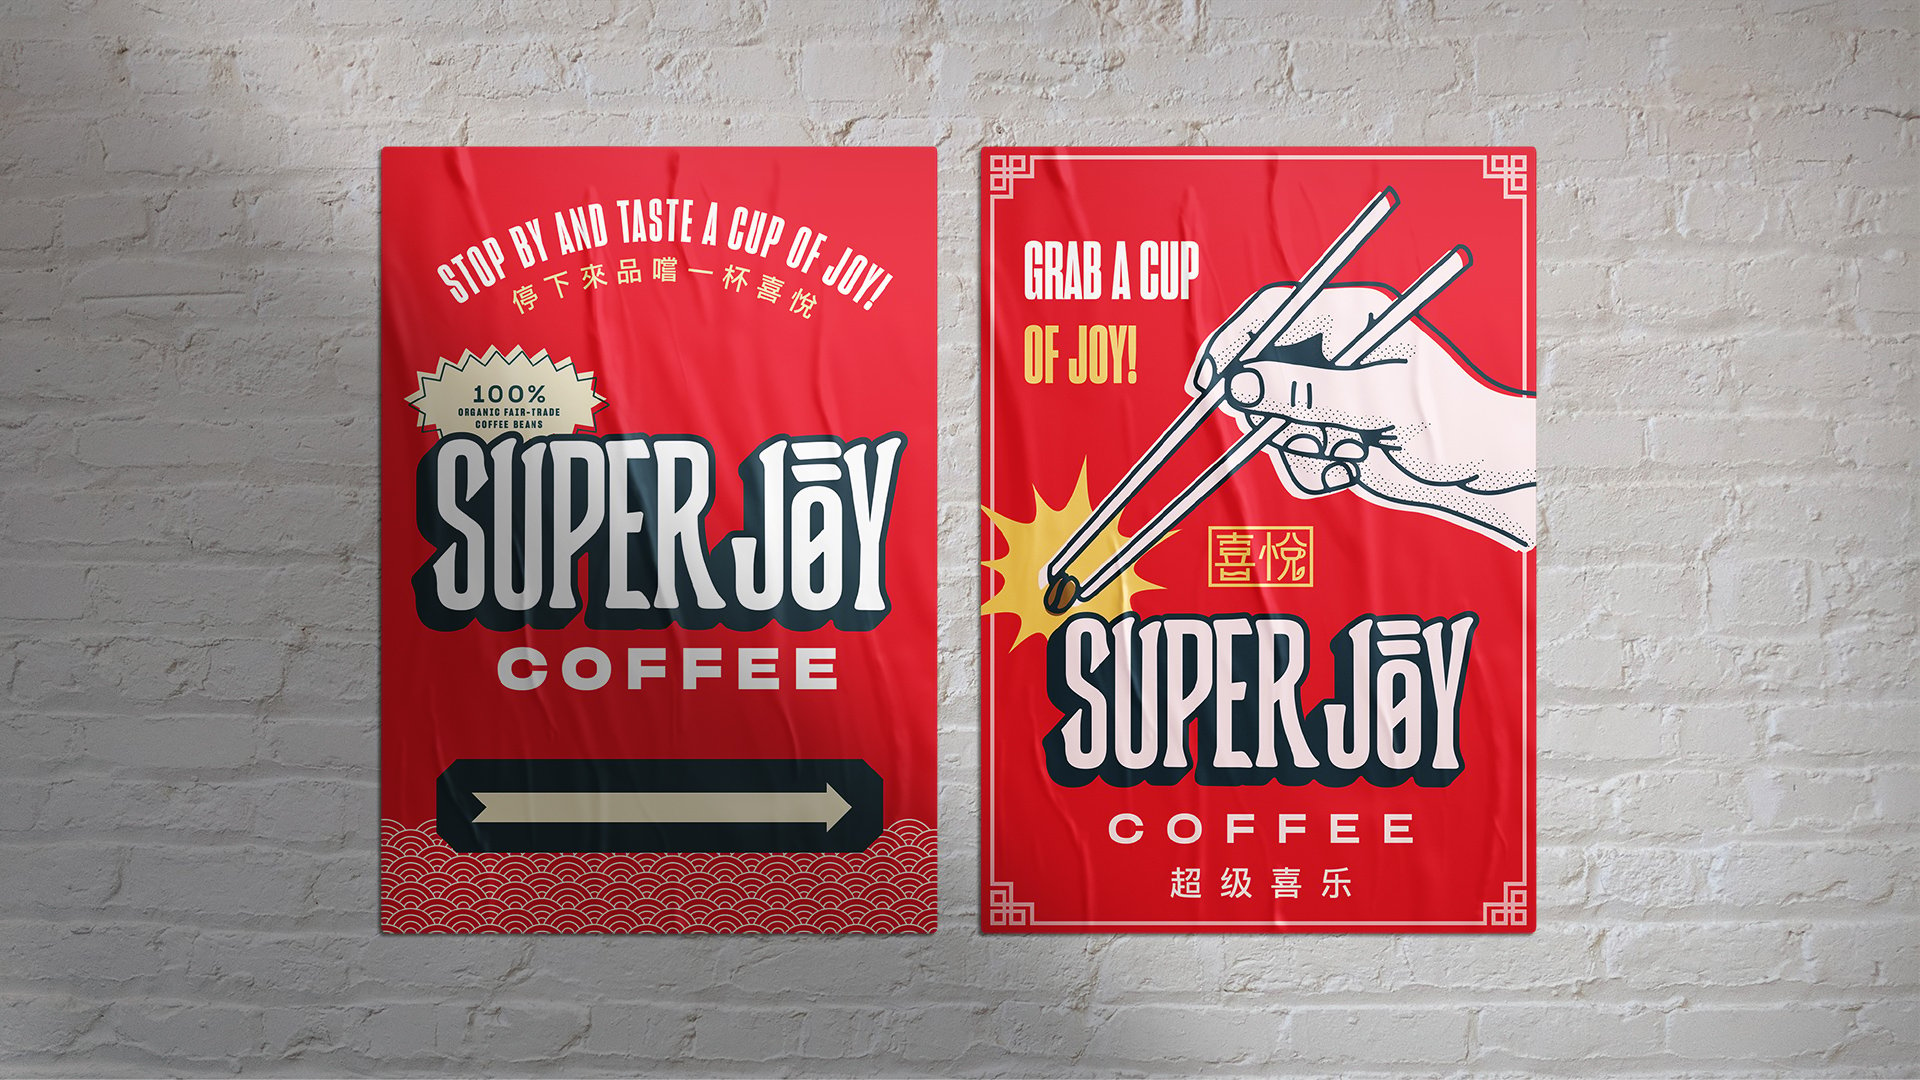 Two Super Joy posters sit against a white brick wall. The one on the left directs customers to the shop. The one on the right features the logo with the hand illustration.